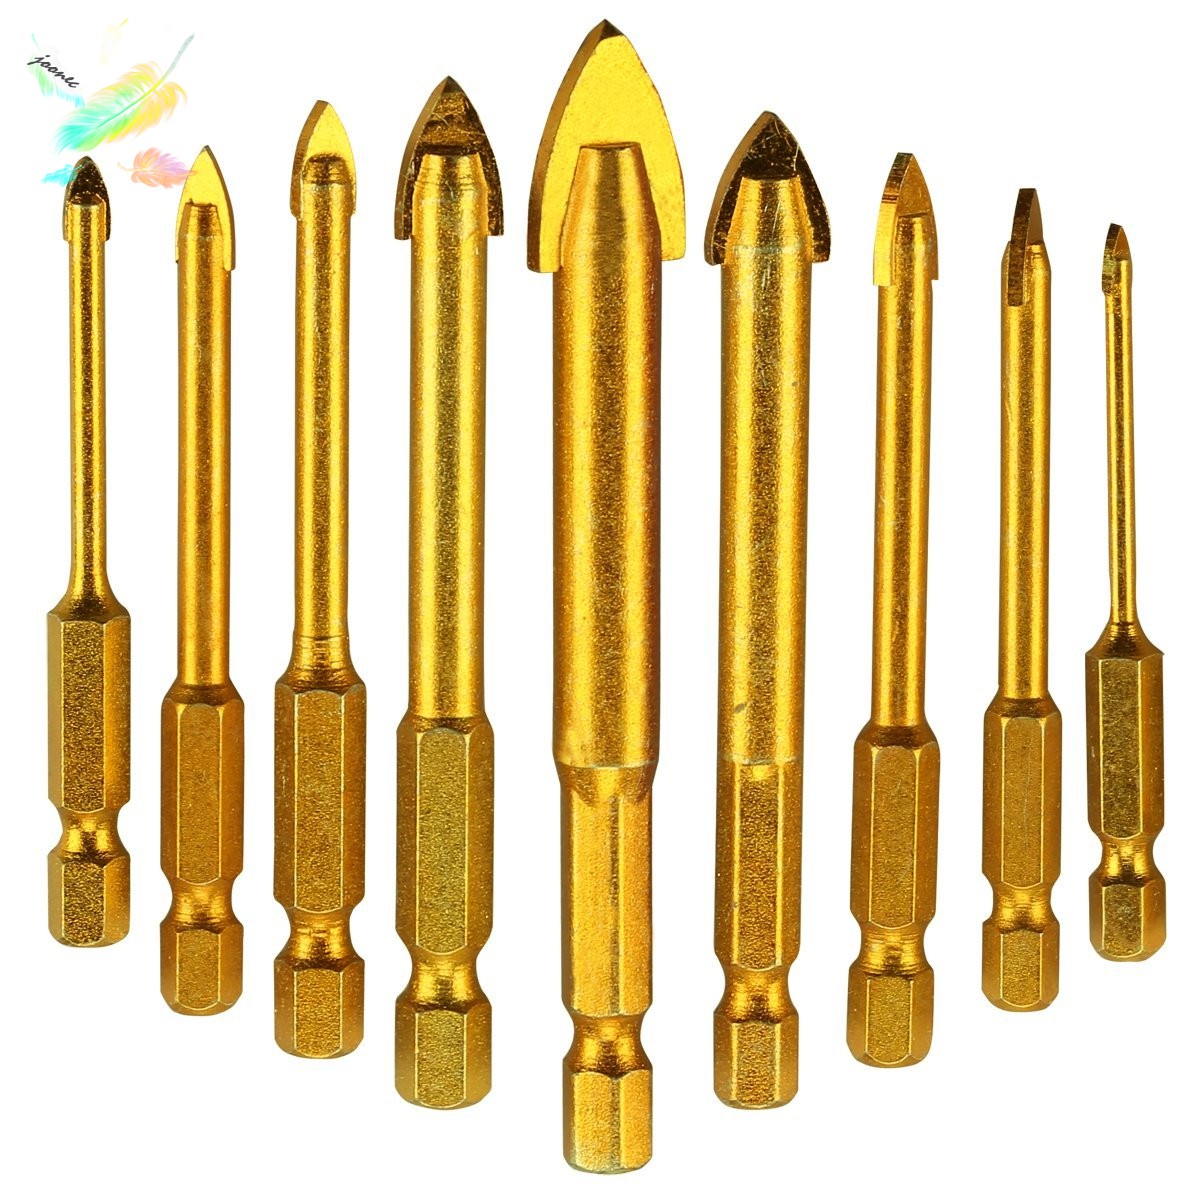 9 Pcs Tile Drill Ceramic Drill Set Of Glass Drill Bits Set Hexagon Tile Drill Set Glass Tile Drilling Tool For Mirrors Glass Tiles 3 4 5 6 8 10 12mm Shopee Indonesia